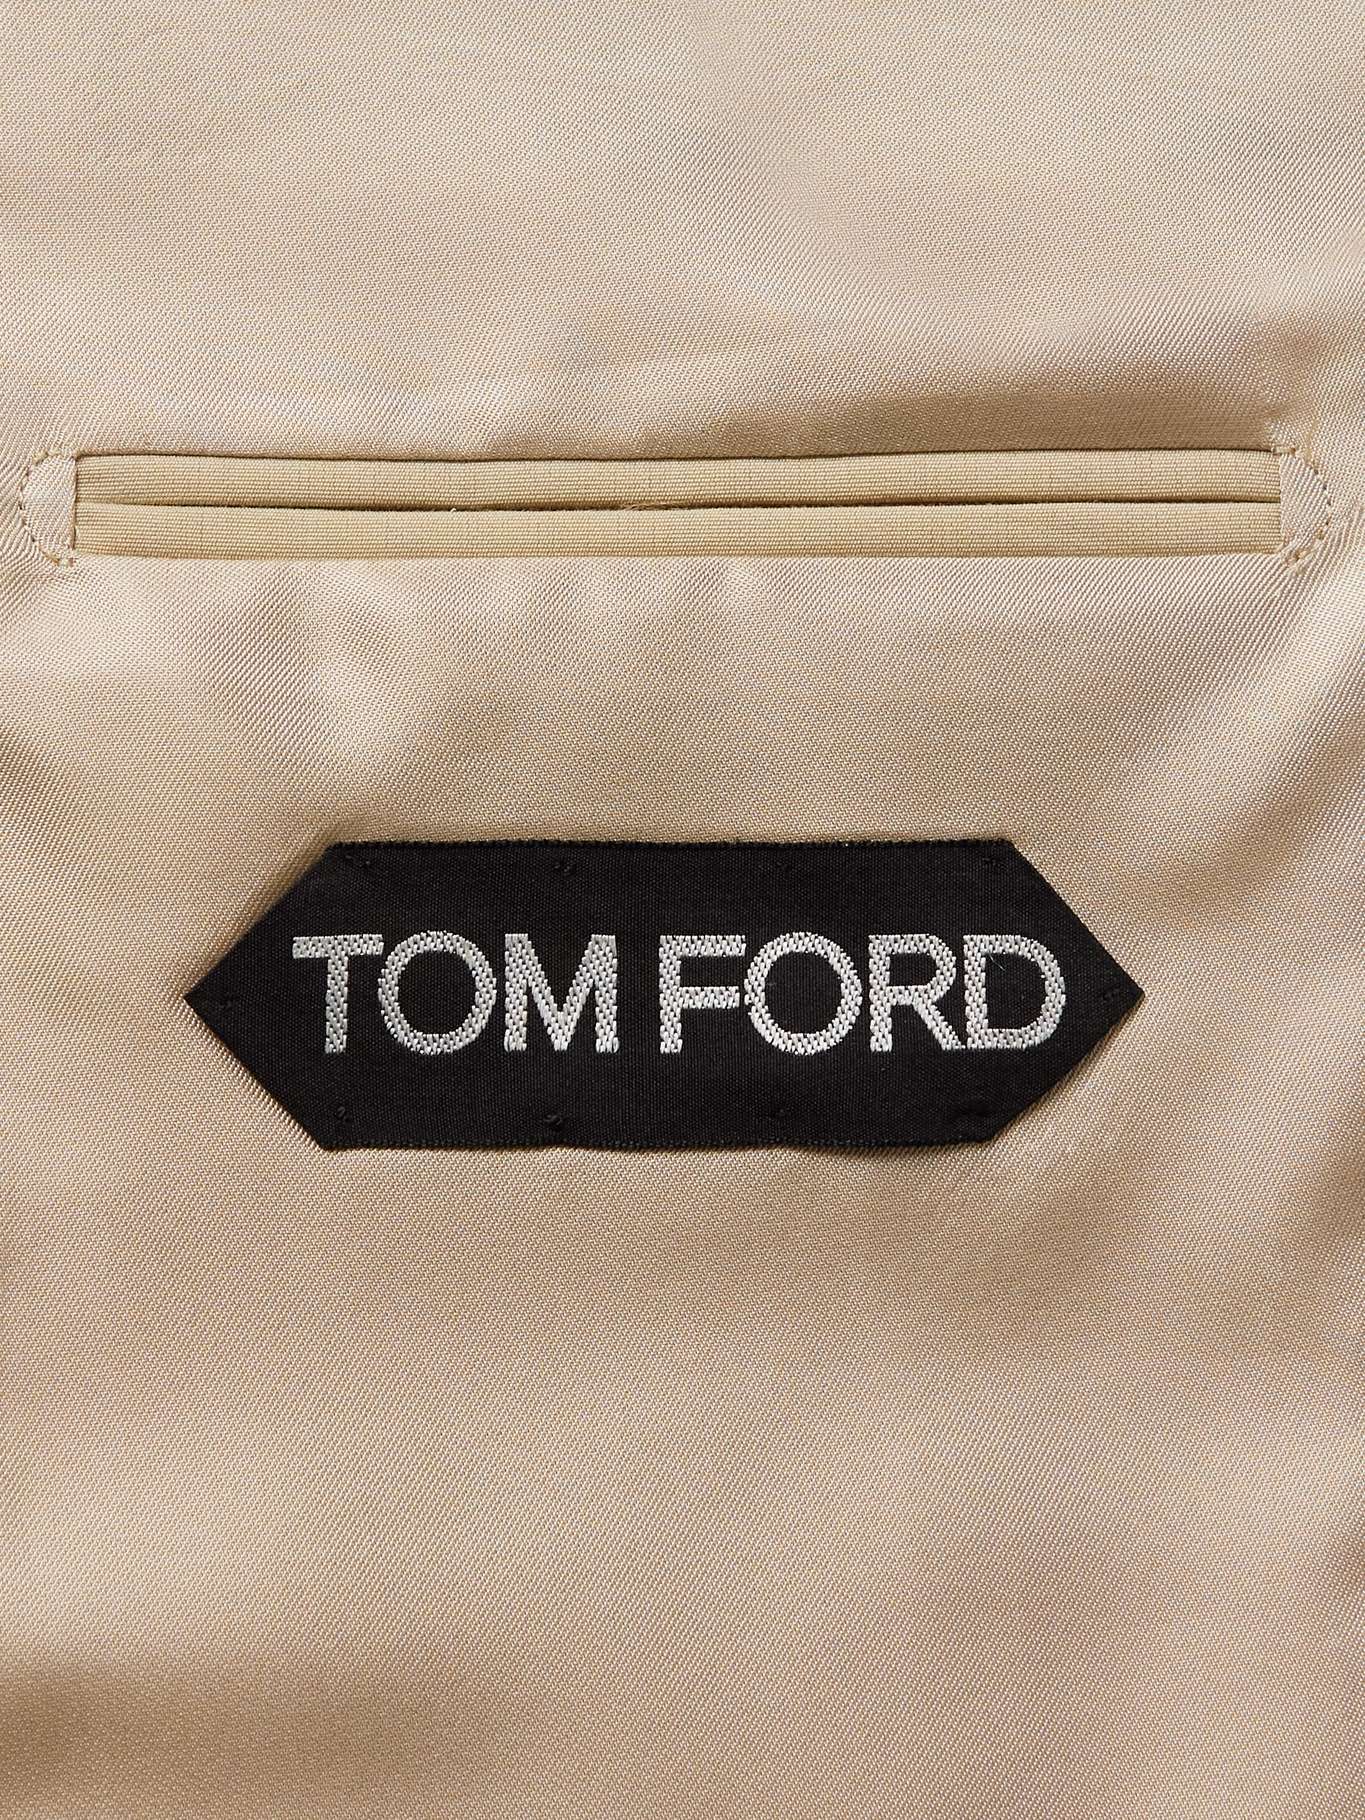 TOM FORD O'Connor Slim-Fit Cotton and Silk-Blend Suit Jacket for Men ...